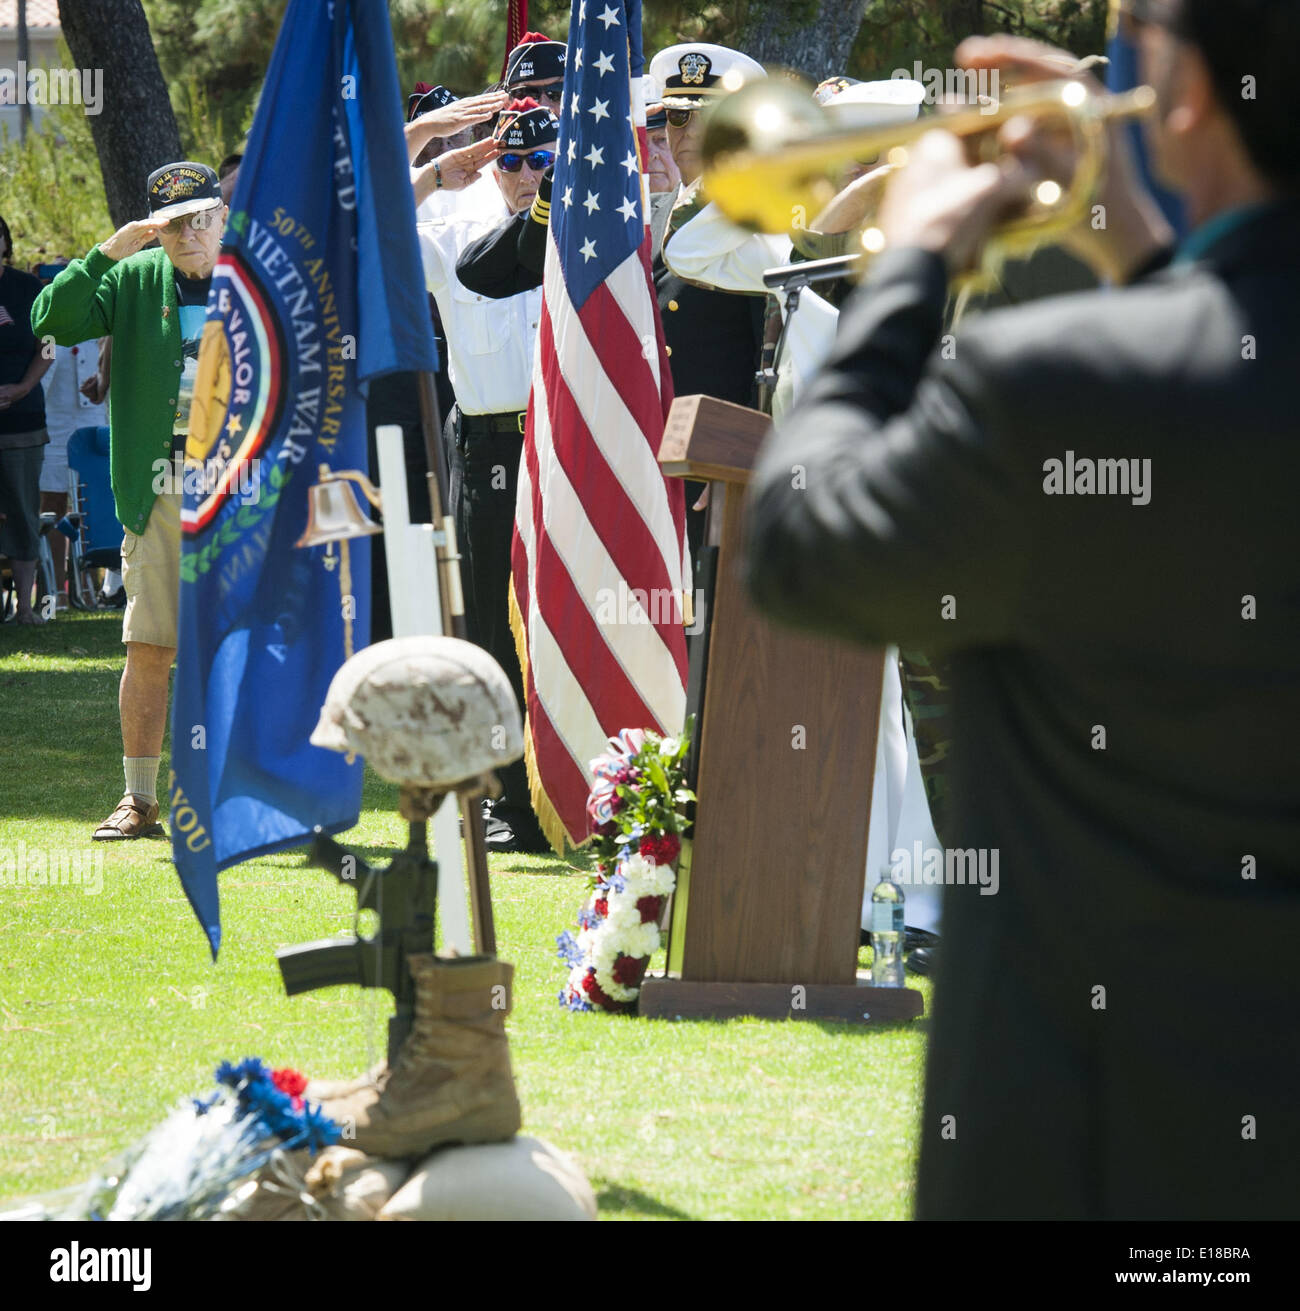 May 26, 2014 - Capistrano Beach/Dana Point, California, U.S - Marine Veteran Lt. Col. William R. Duncan, salutes along with other veterans, as Taps are played in honor and remembrance of America's war dead on Monday morning. Duncan served in WW II, Korea and Vietnam. David Longoria, of Pasadena, plays Taps, a traditional Memorial Day honor, on trumpet----Dana Point's Veterans of Foreign Wars Post 9934, along with the Ladies Auxiliary and the City of Dana Point, hosted this year's Memorial Day Ceremony at Pines Park in Capistrano Beach. Credit:  ZUMA Press, Inc./Alamy Live News Stock Photo